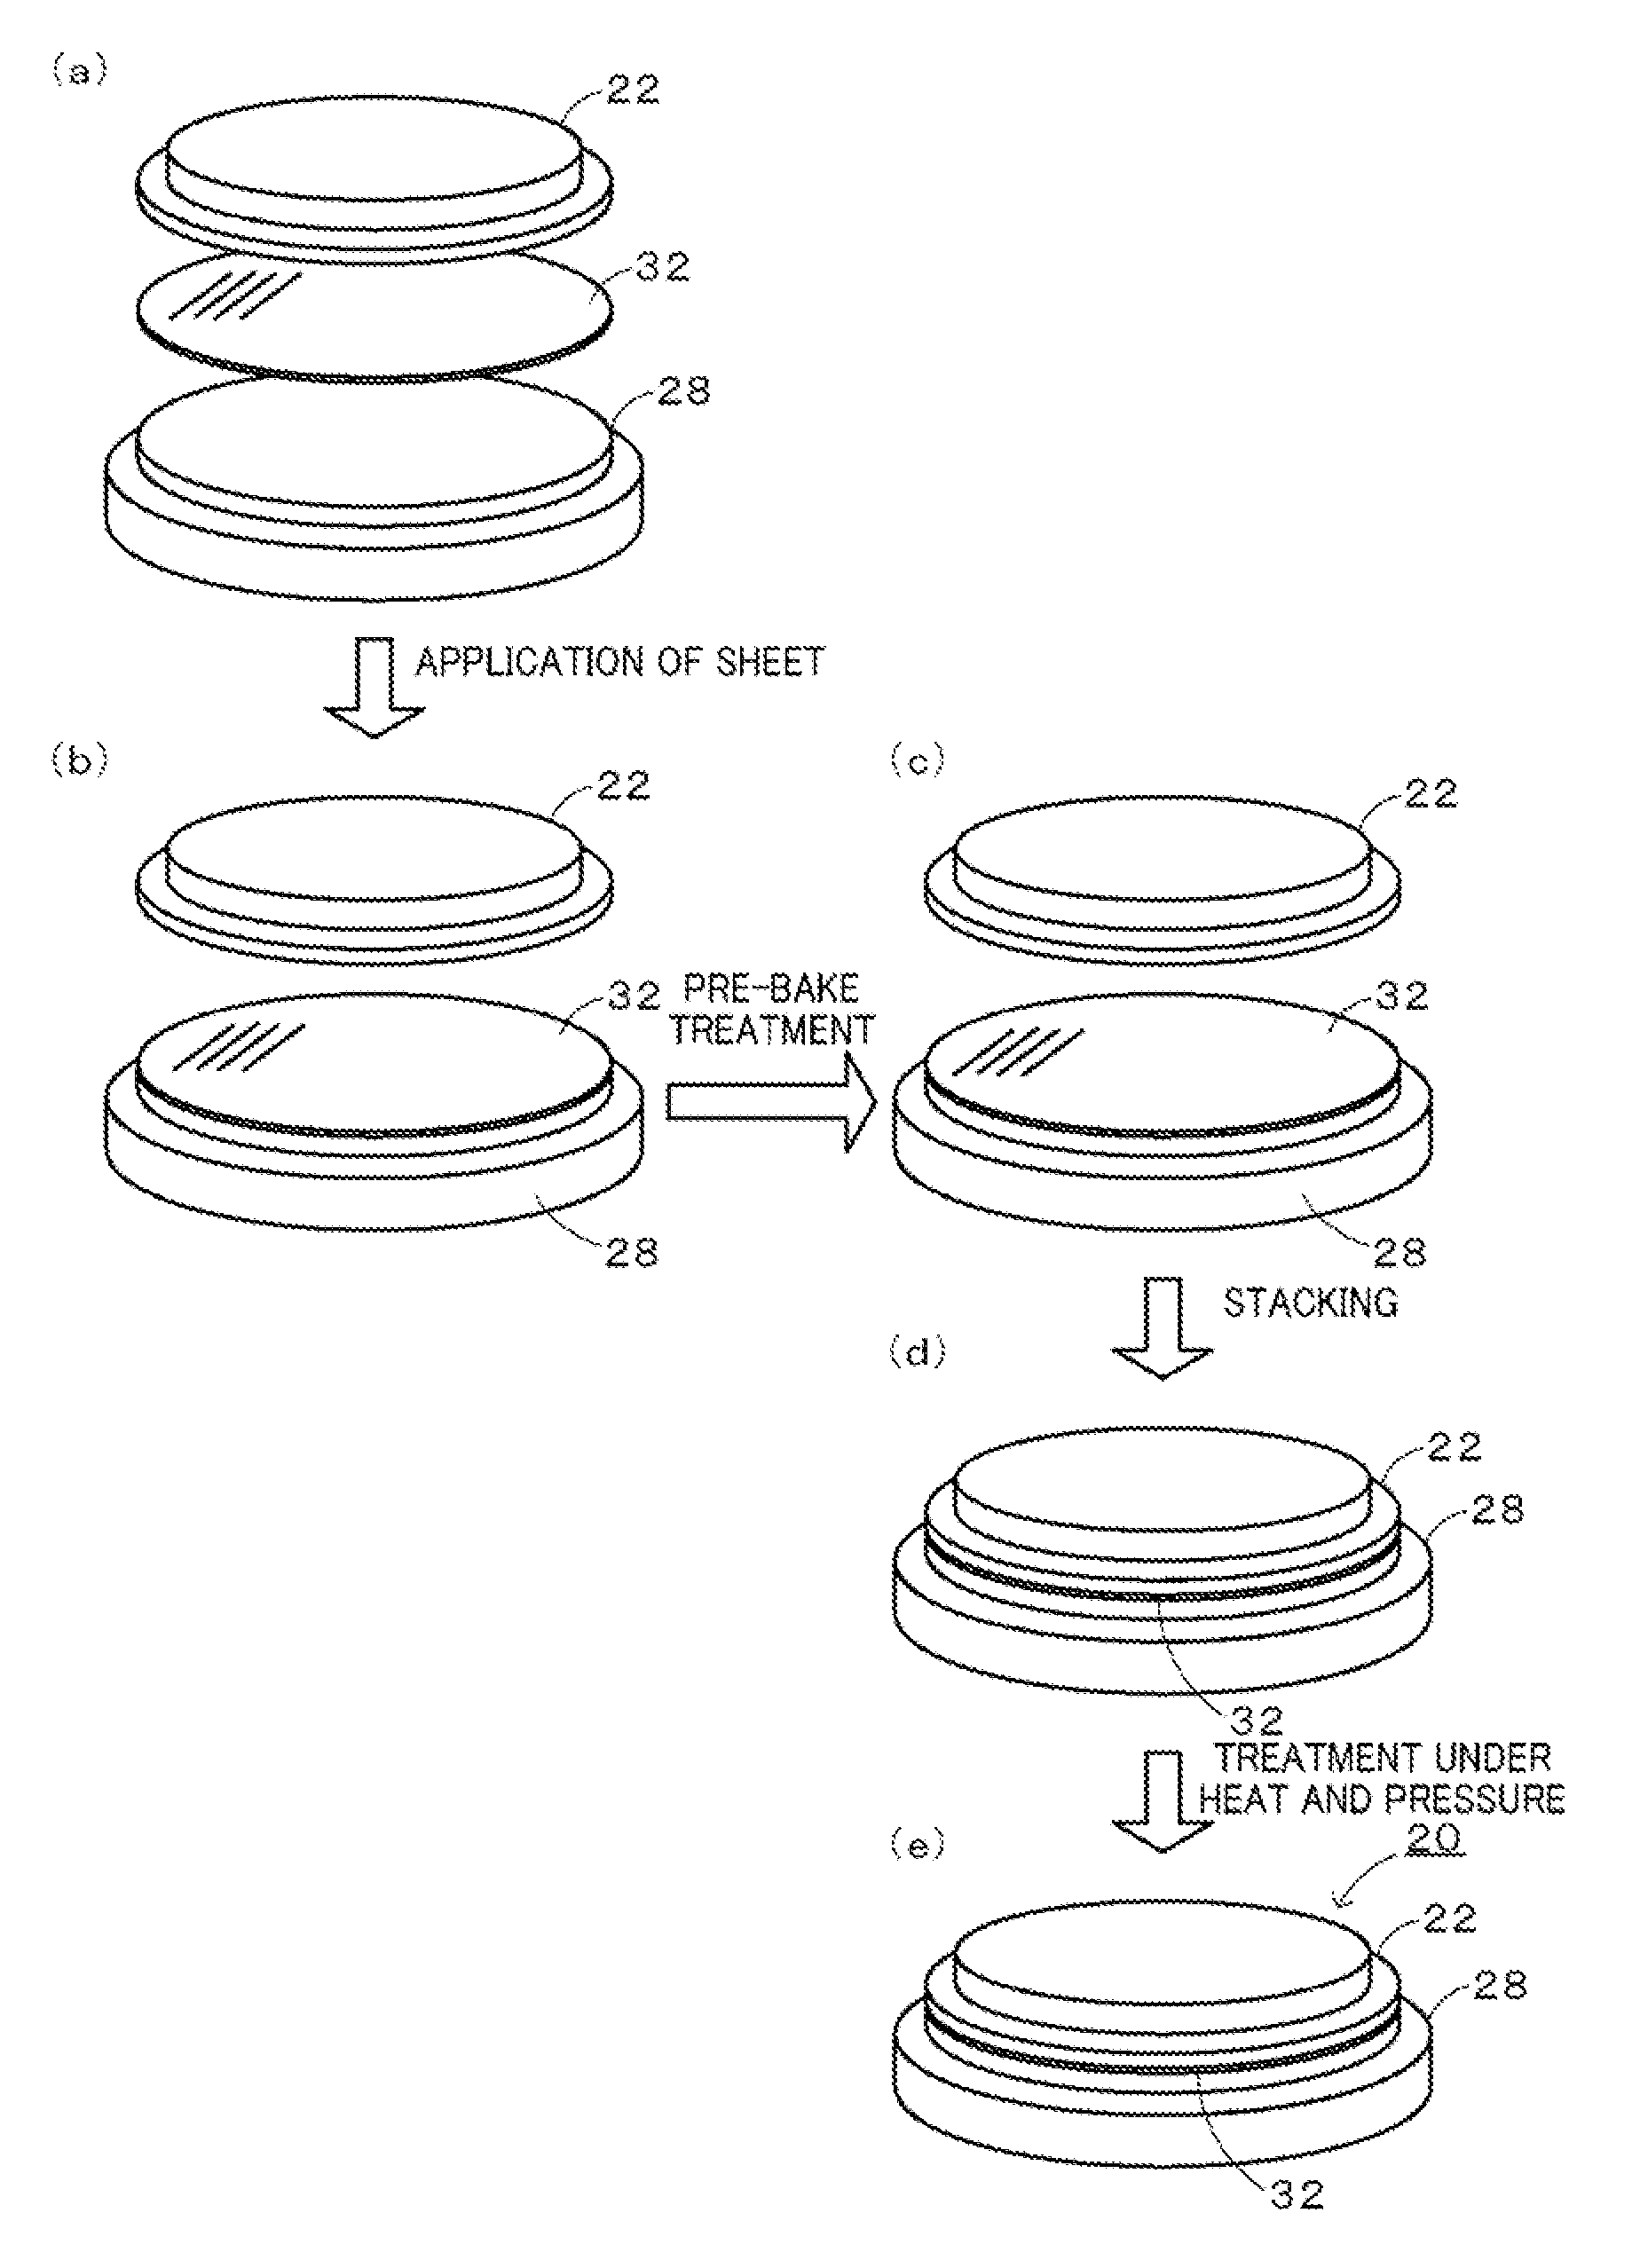 Ceramic-metal bonded body and method of producing the same